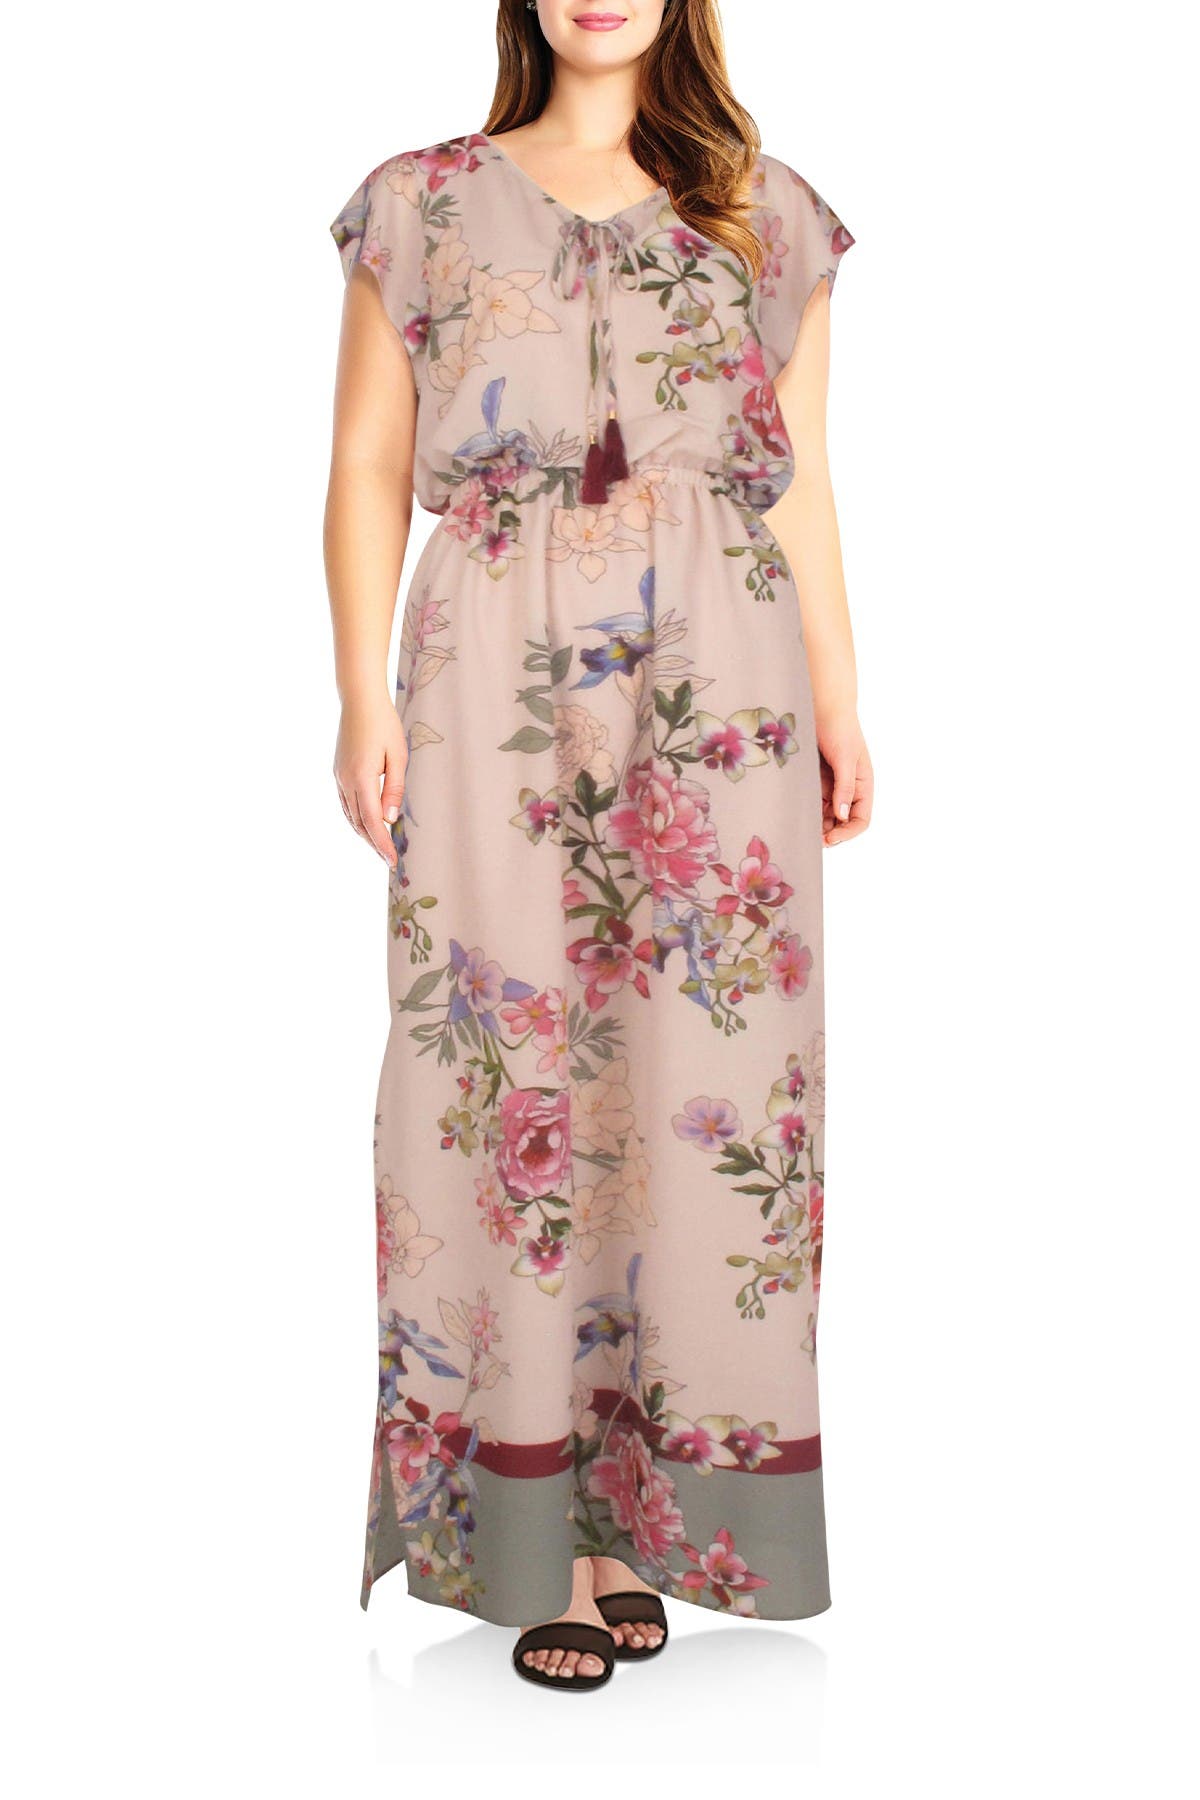 Adrianna Papell Floral Border Maxi Dress In Open White60